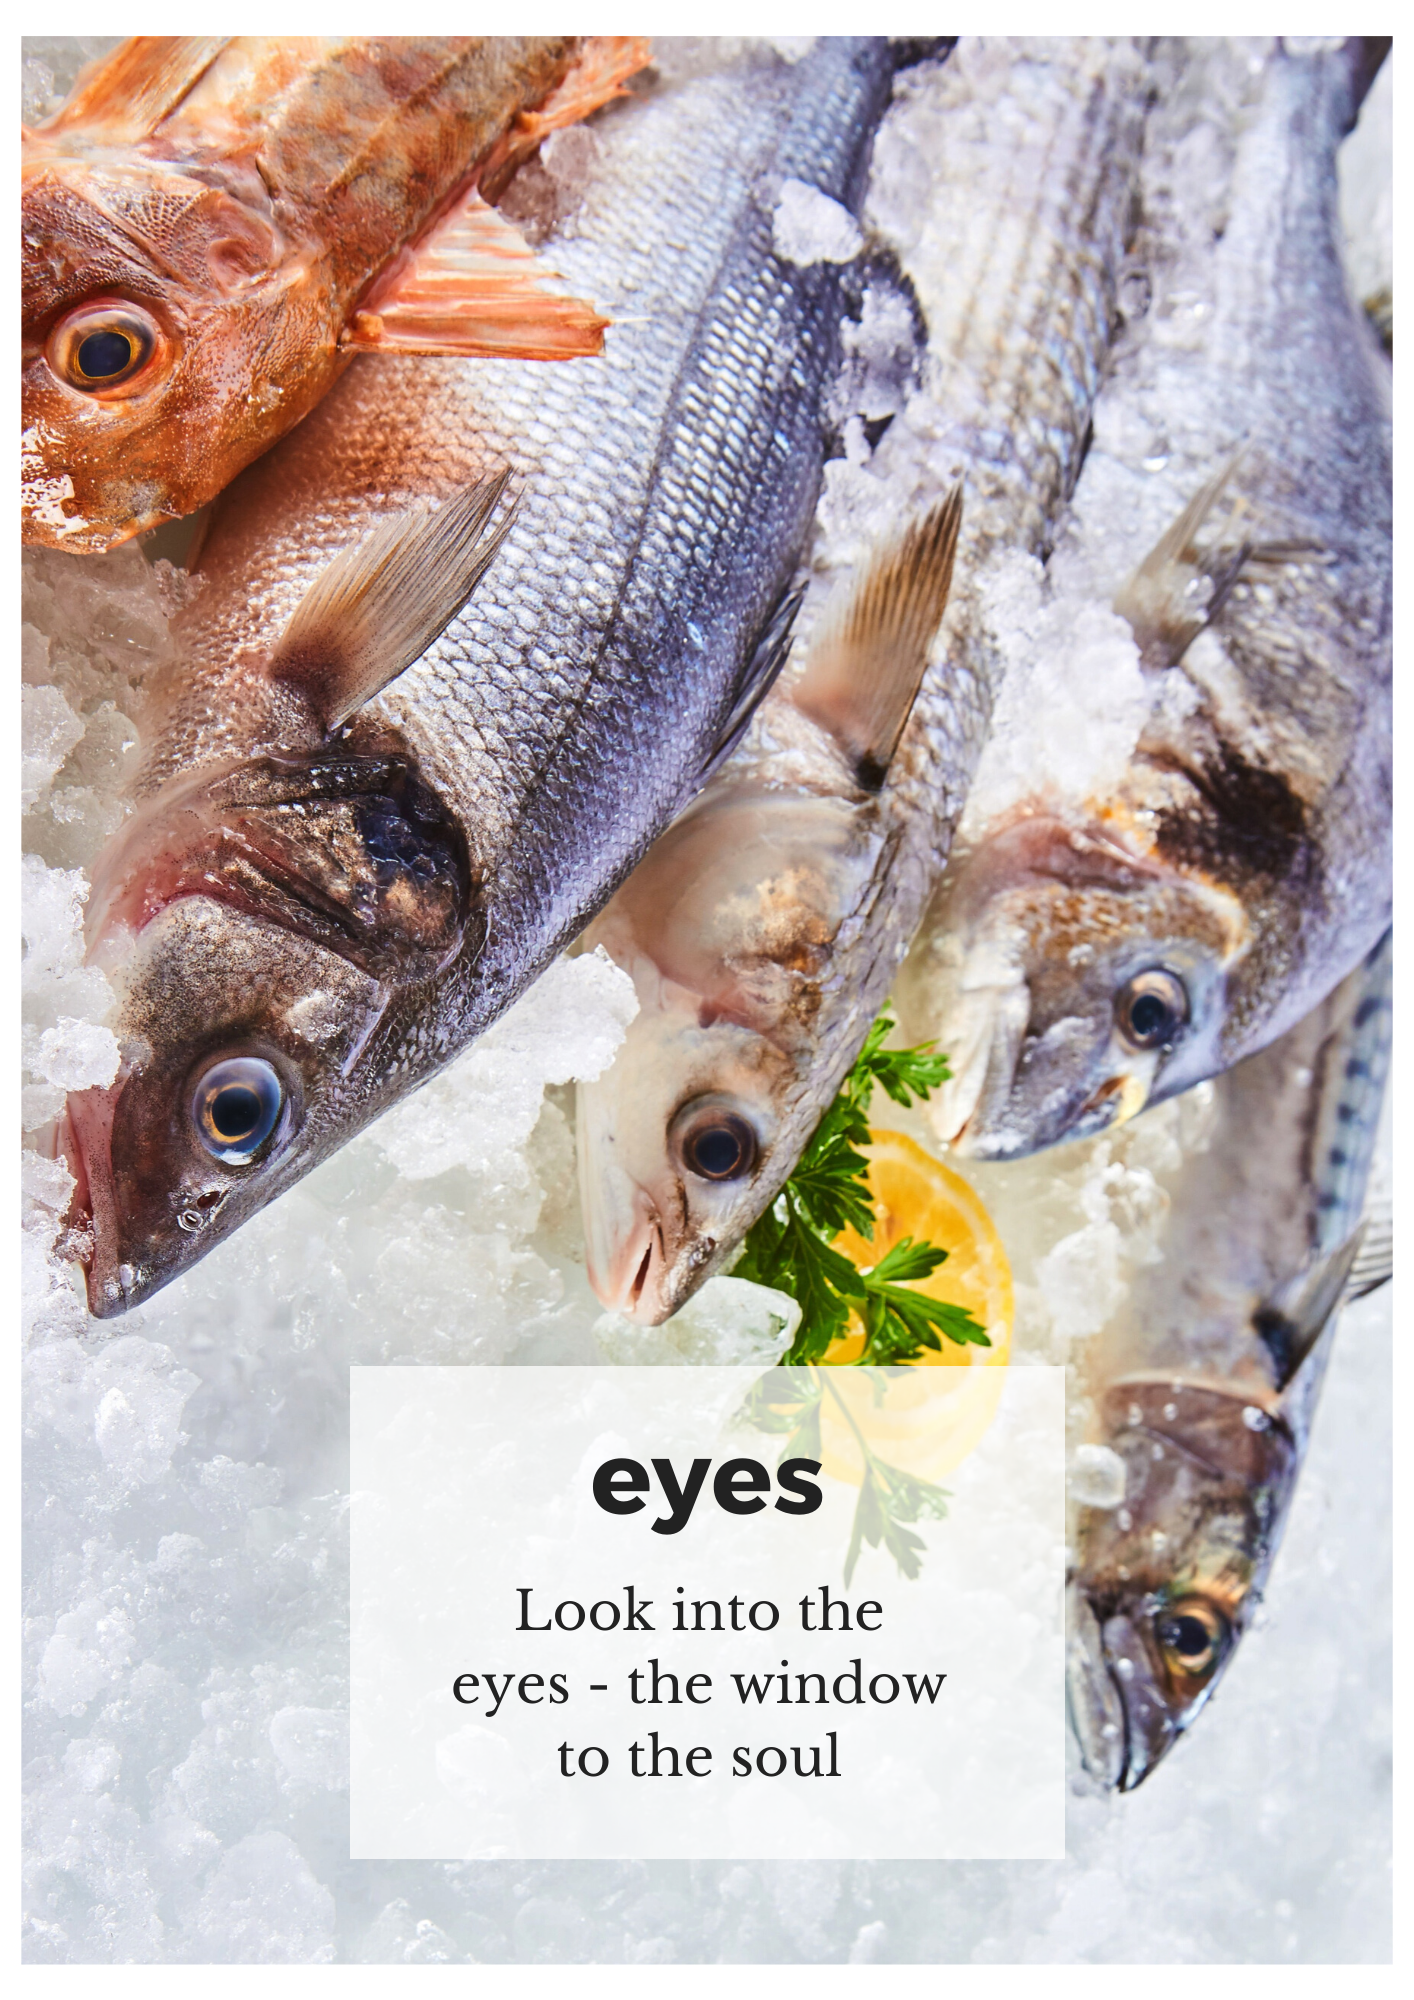 Eye of the fish